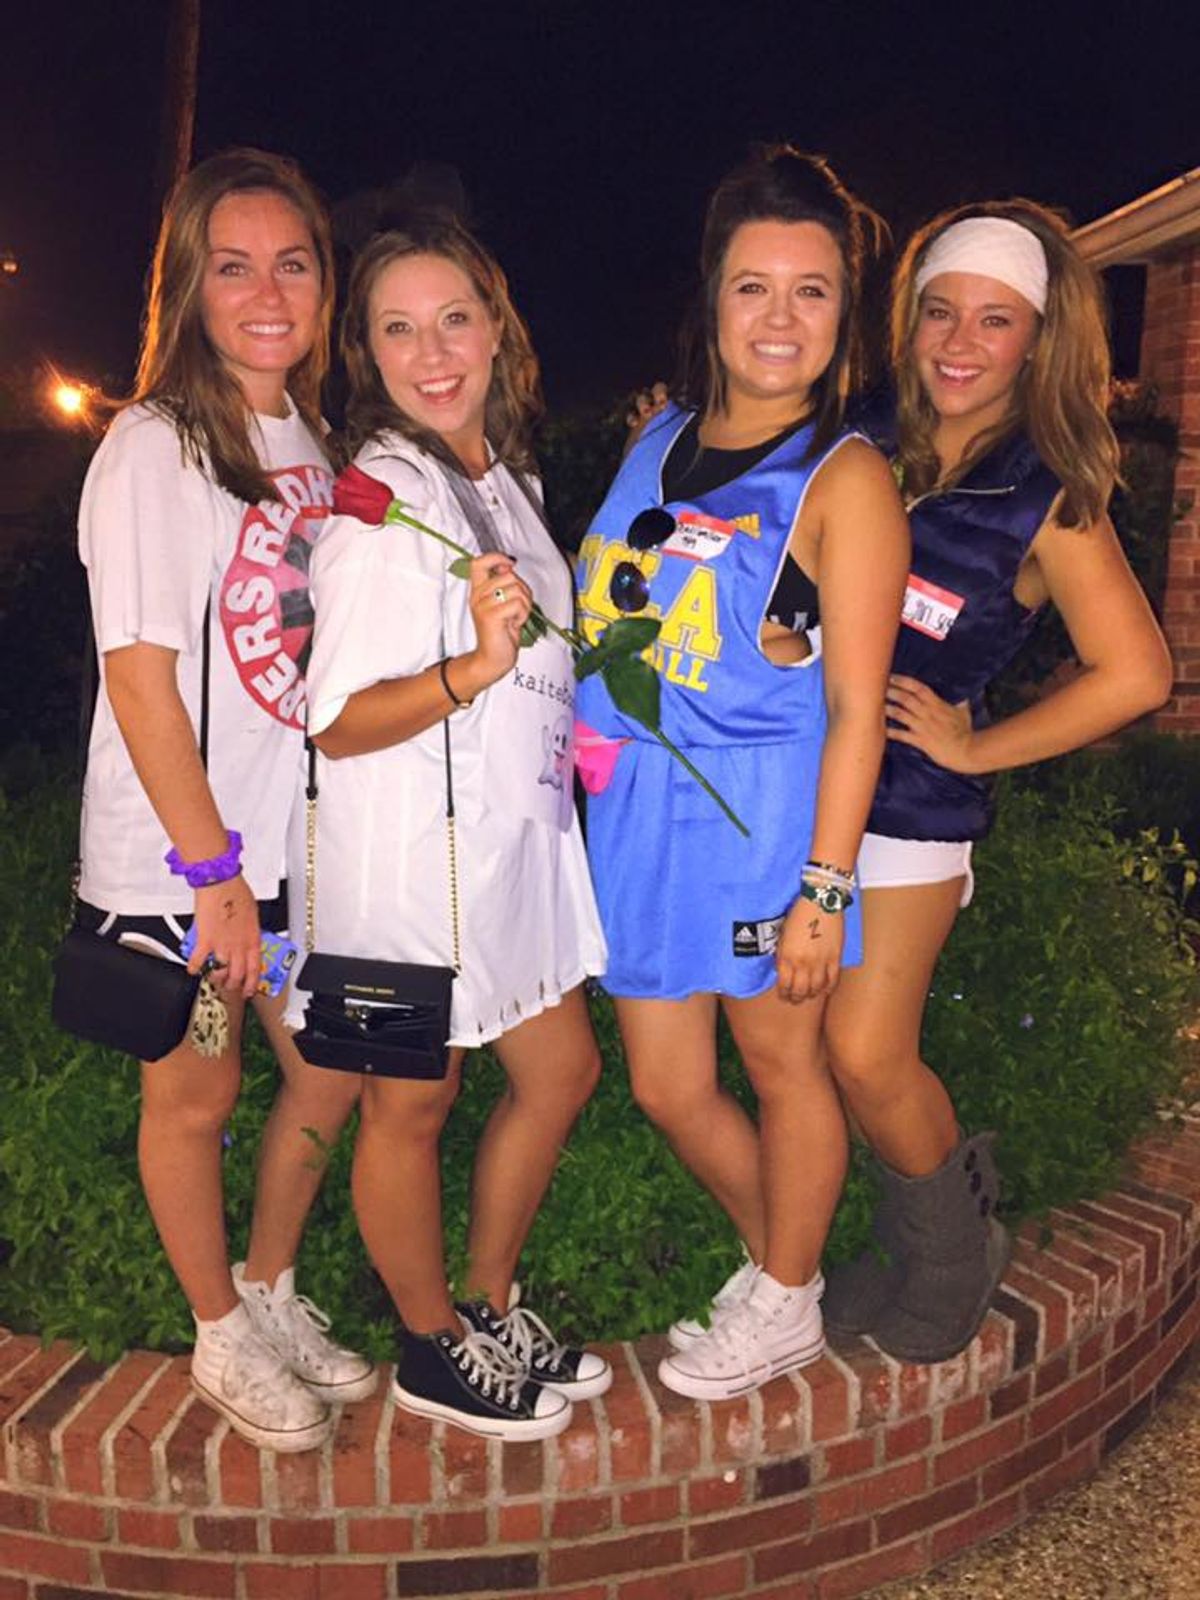 An Open Letter To The Guy Who Just Said "Sorority Girls Aren't My Type"